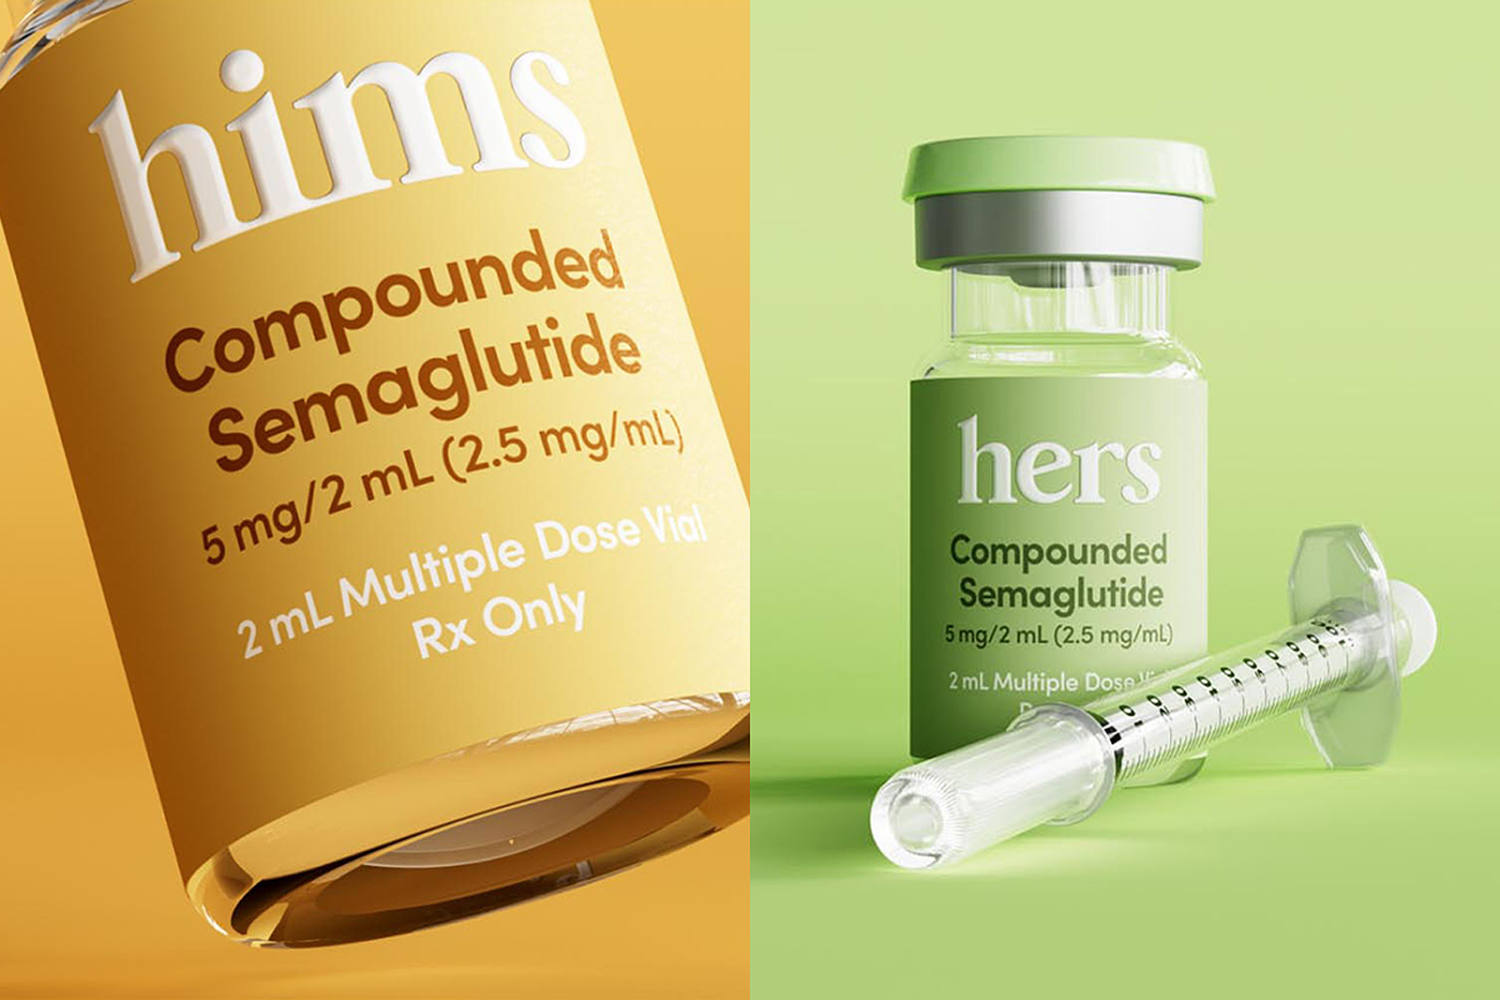 Hims & Hers Health says it will offer compounded GLP-1 injections